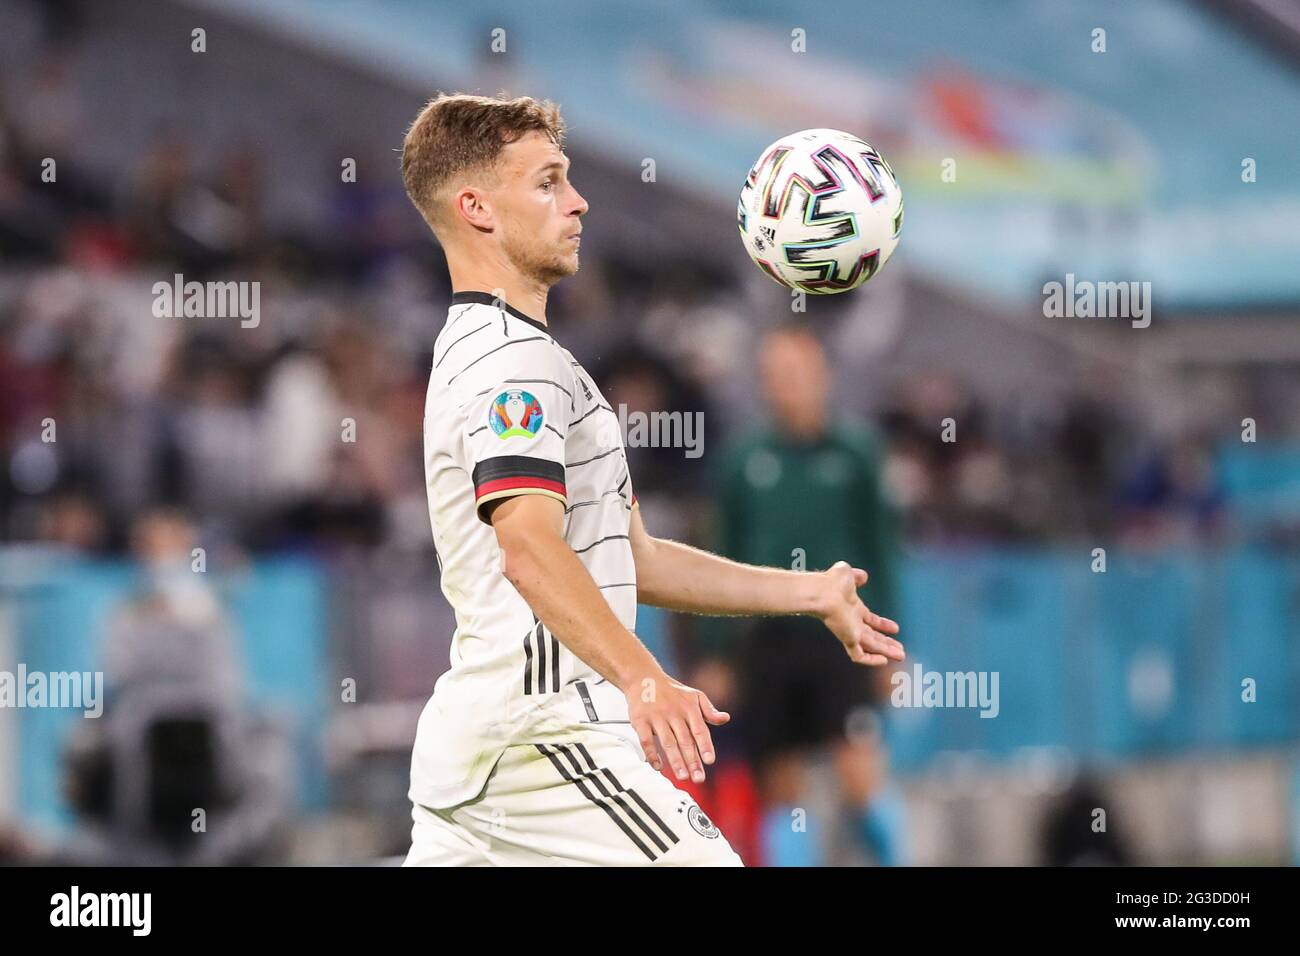 Munich, Germany. 15th June, 2021. Joshua Kimmich of Germany controls the ball during the UEFA Euro 2020 Championship Group F match between France and Germany in Munich, Germany, June 15, 2021. Credit: Shan Yuqi/Xinhua/Alamy Live News Stock Photo